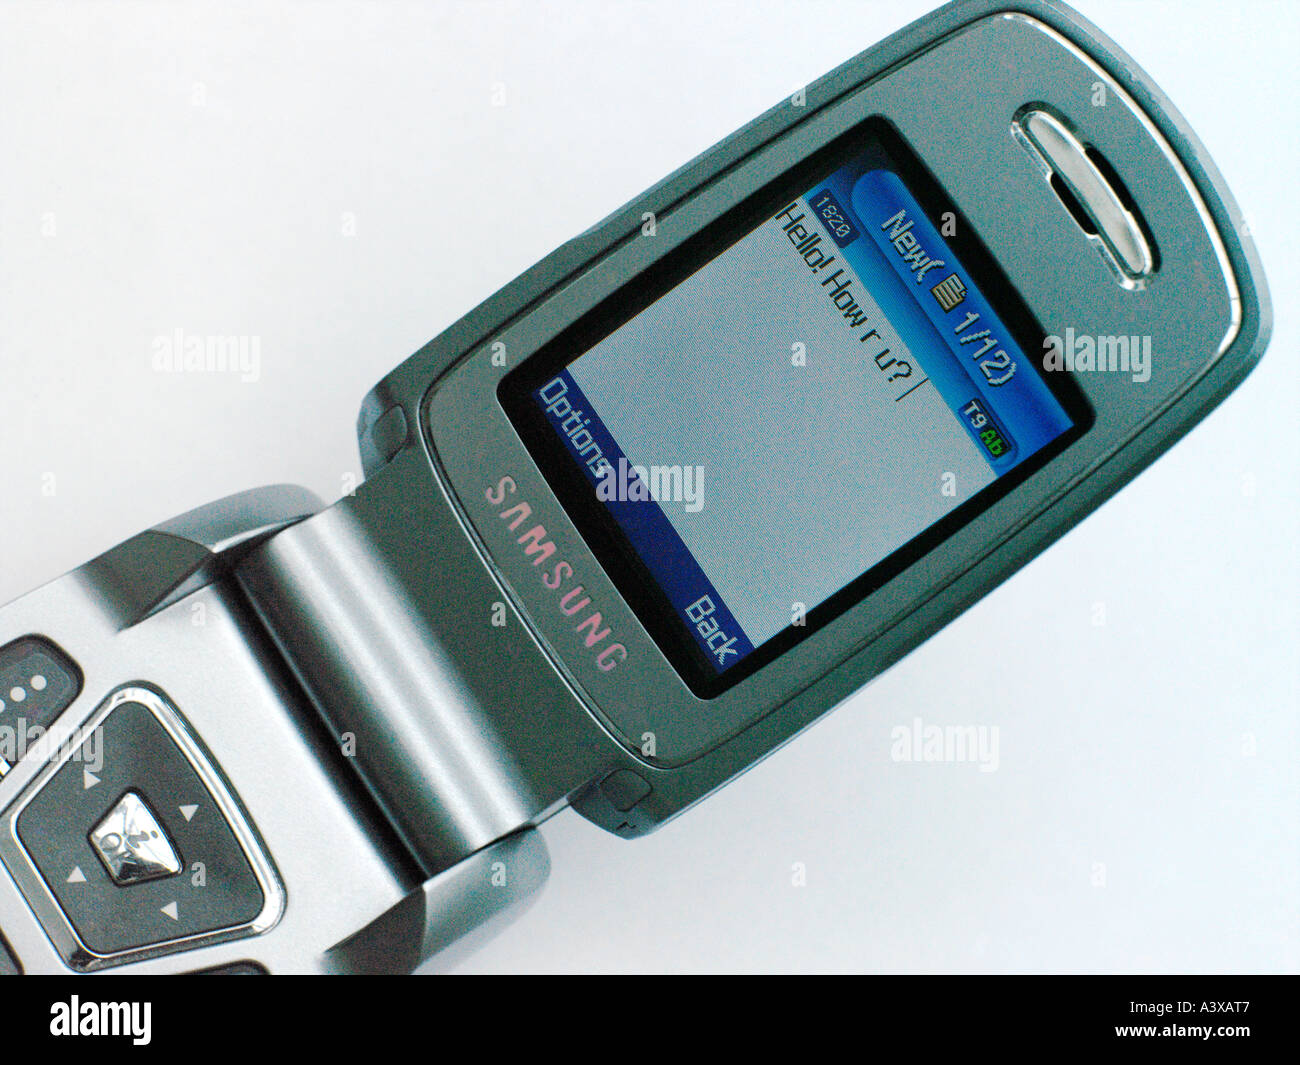 Samsung E720 Mobile Phone with Text Message Hello How R U ? Stock Photo